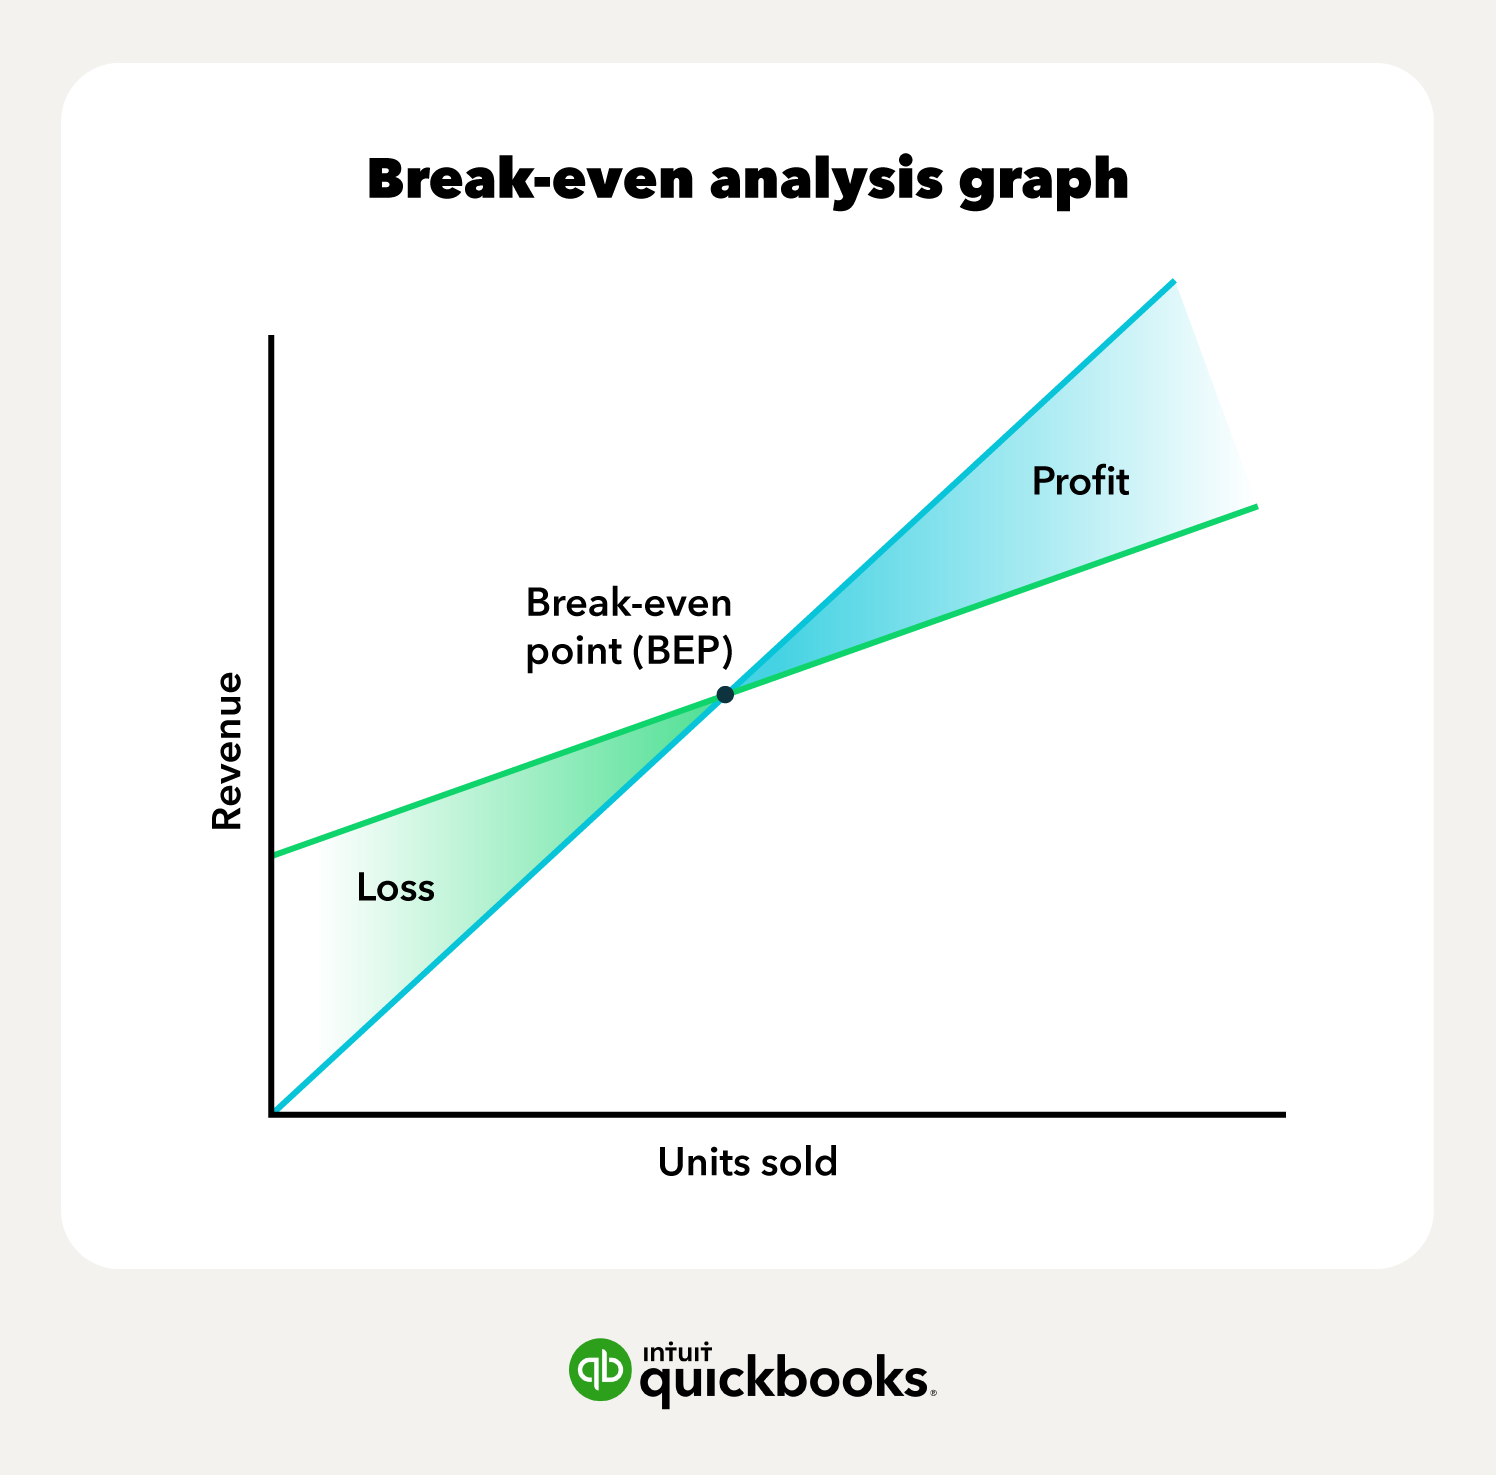 illustration of the break-even point analysis diagram showing where profit and loss equal each other based on revenue and units sold